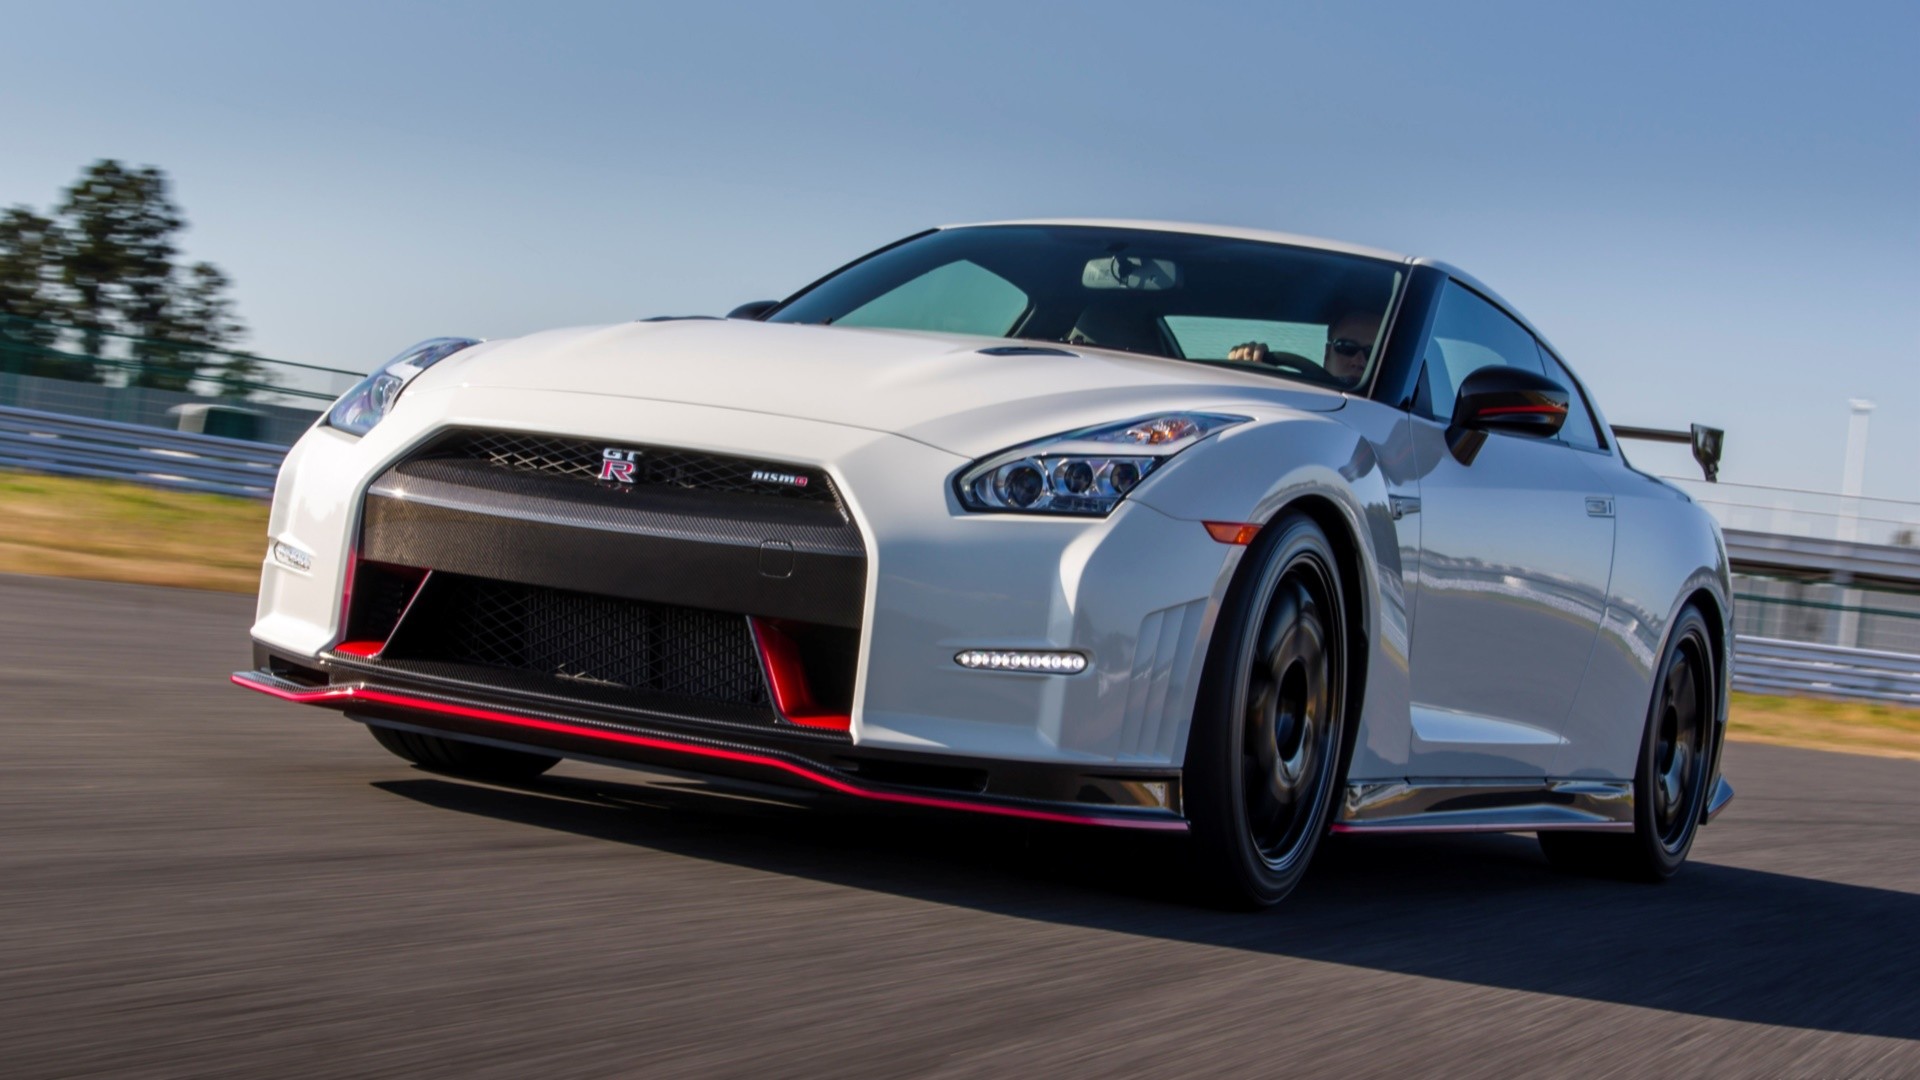 1920x1080 11 2015 Nissan GT-R NISMO HD Wallpapers | Backgrounds - Wallpaper Abyss